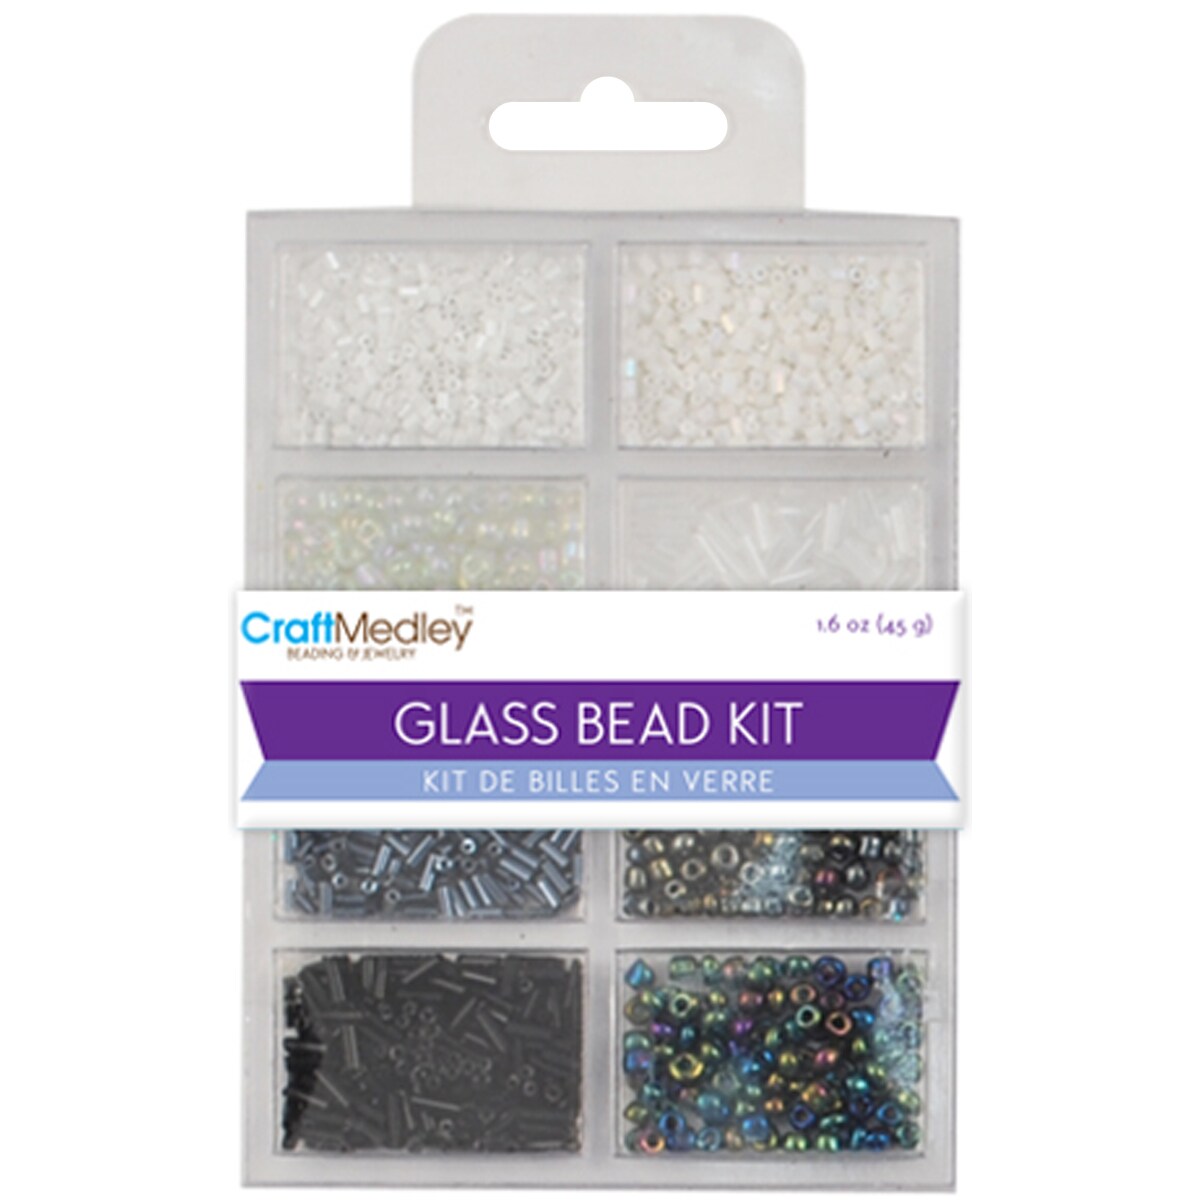 Cousin DIY Seed Black & White Bead Value Pack - Each